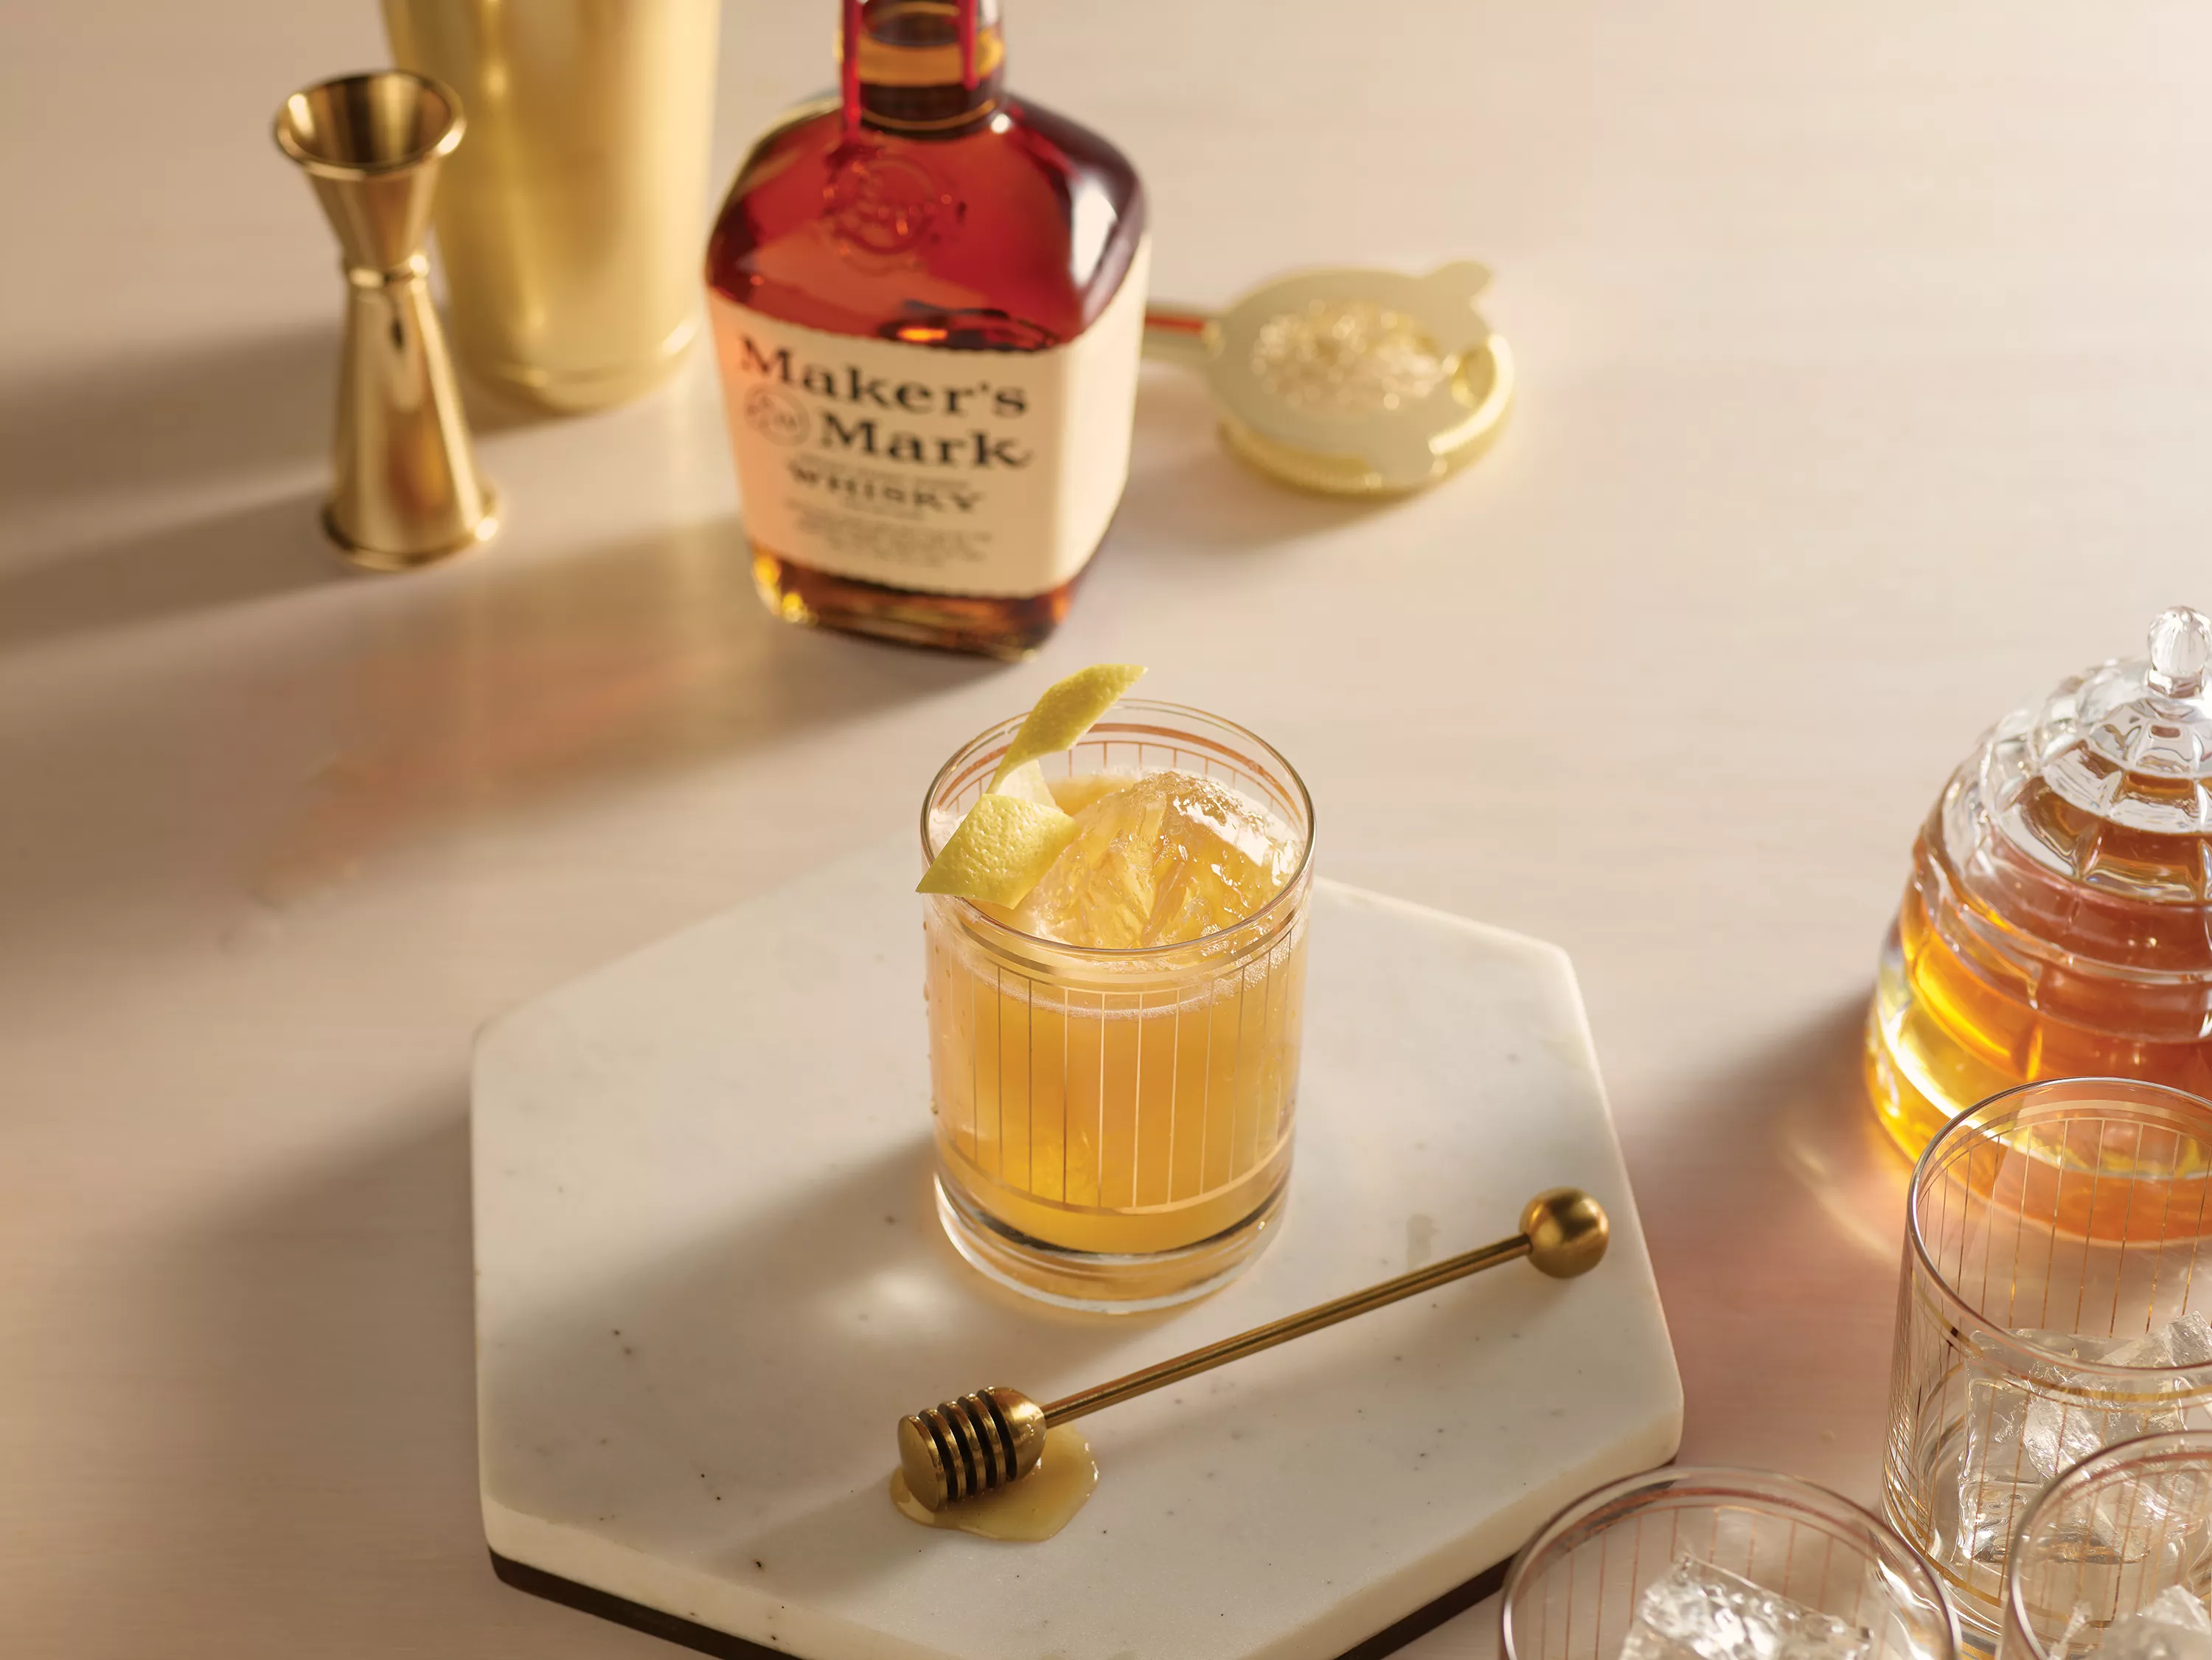 Flat lay of Maker's Mark bourbon whisky with cocktail and cocktail garnishings